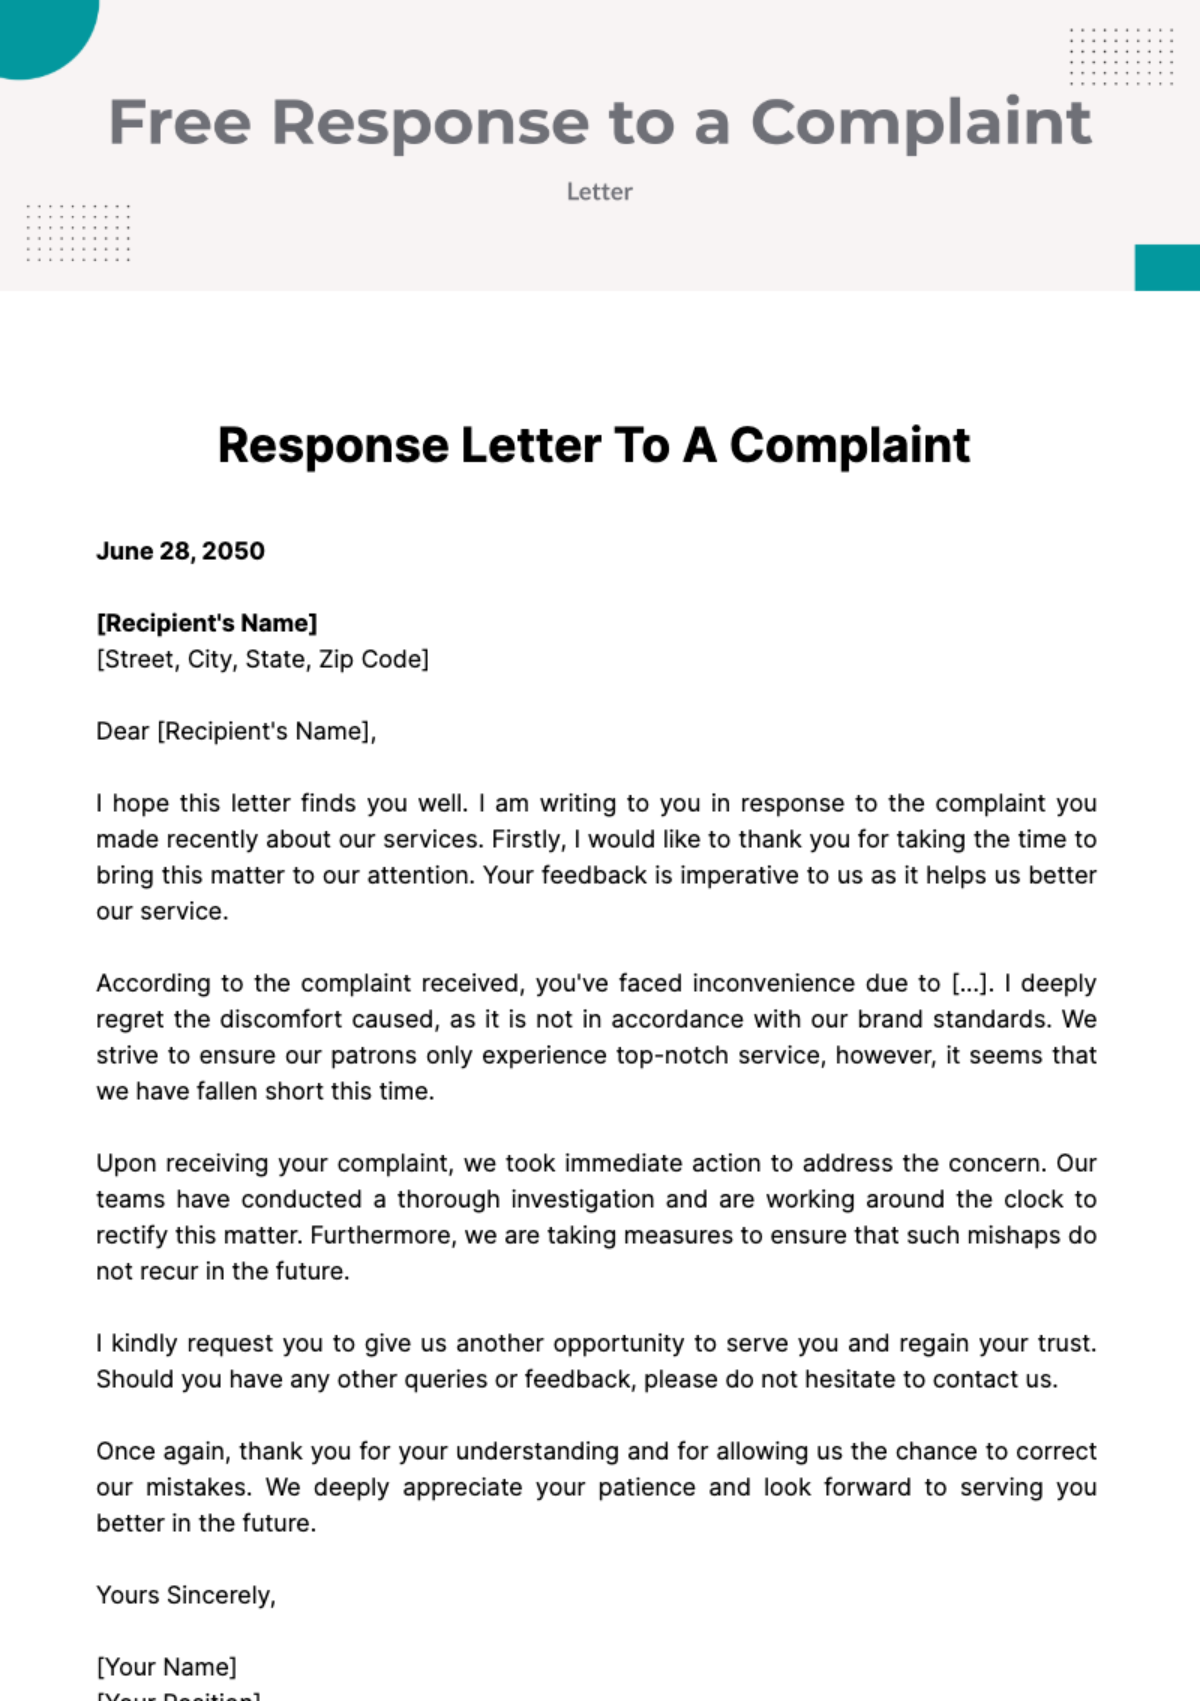 Free Response Letter to a Complaint Template